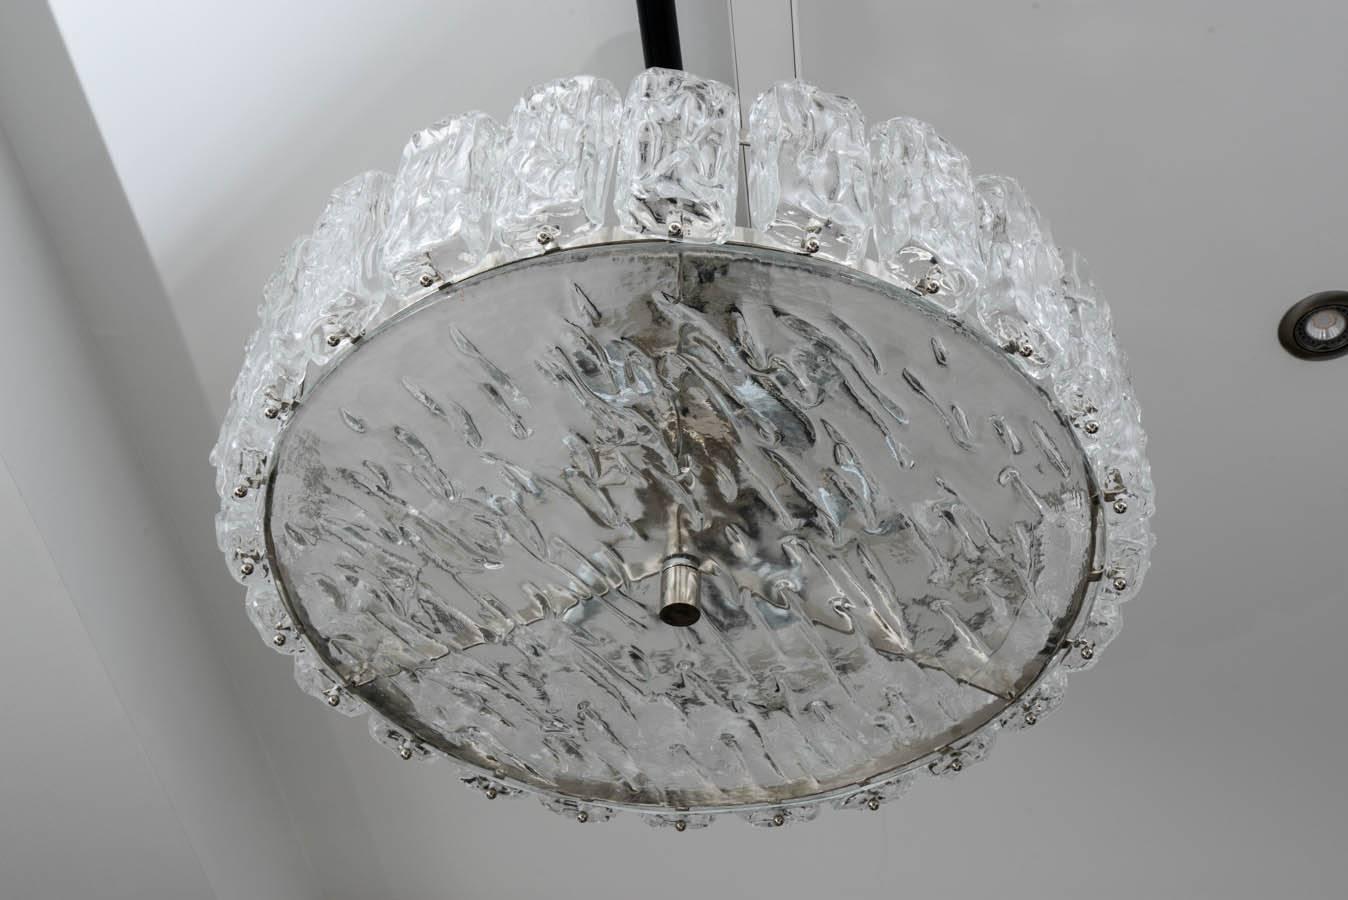 Murano chandelier, ceiling light in thick frosted glass.

We have a pair

